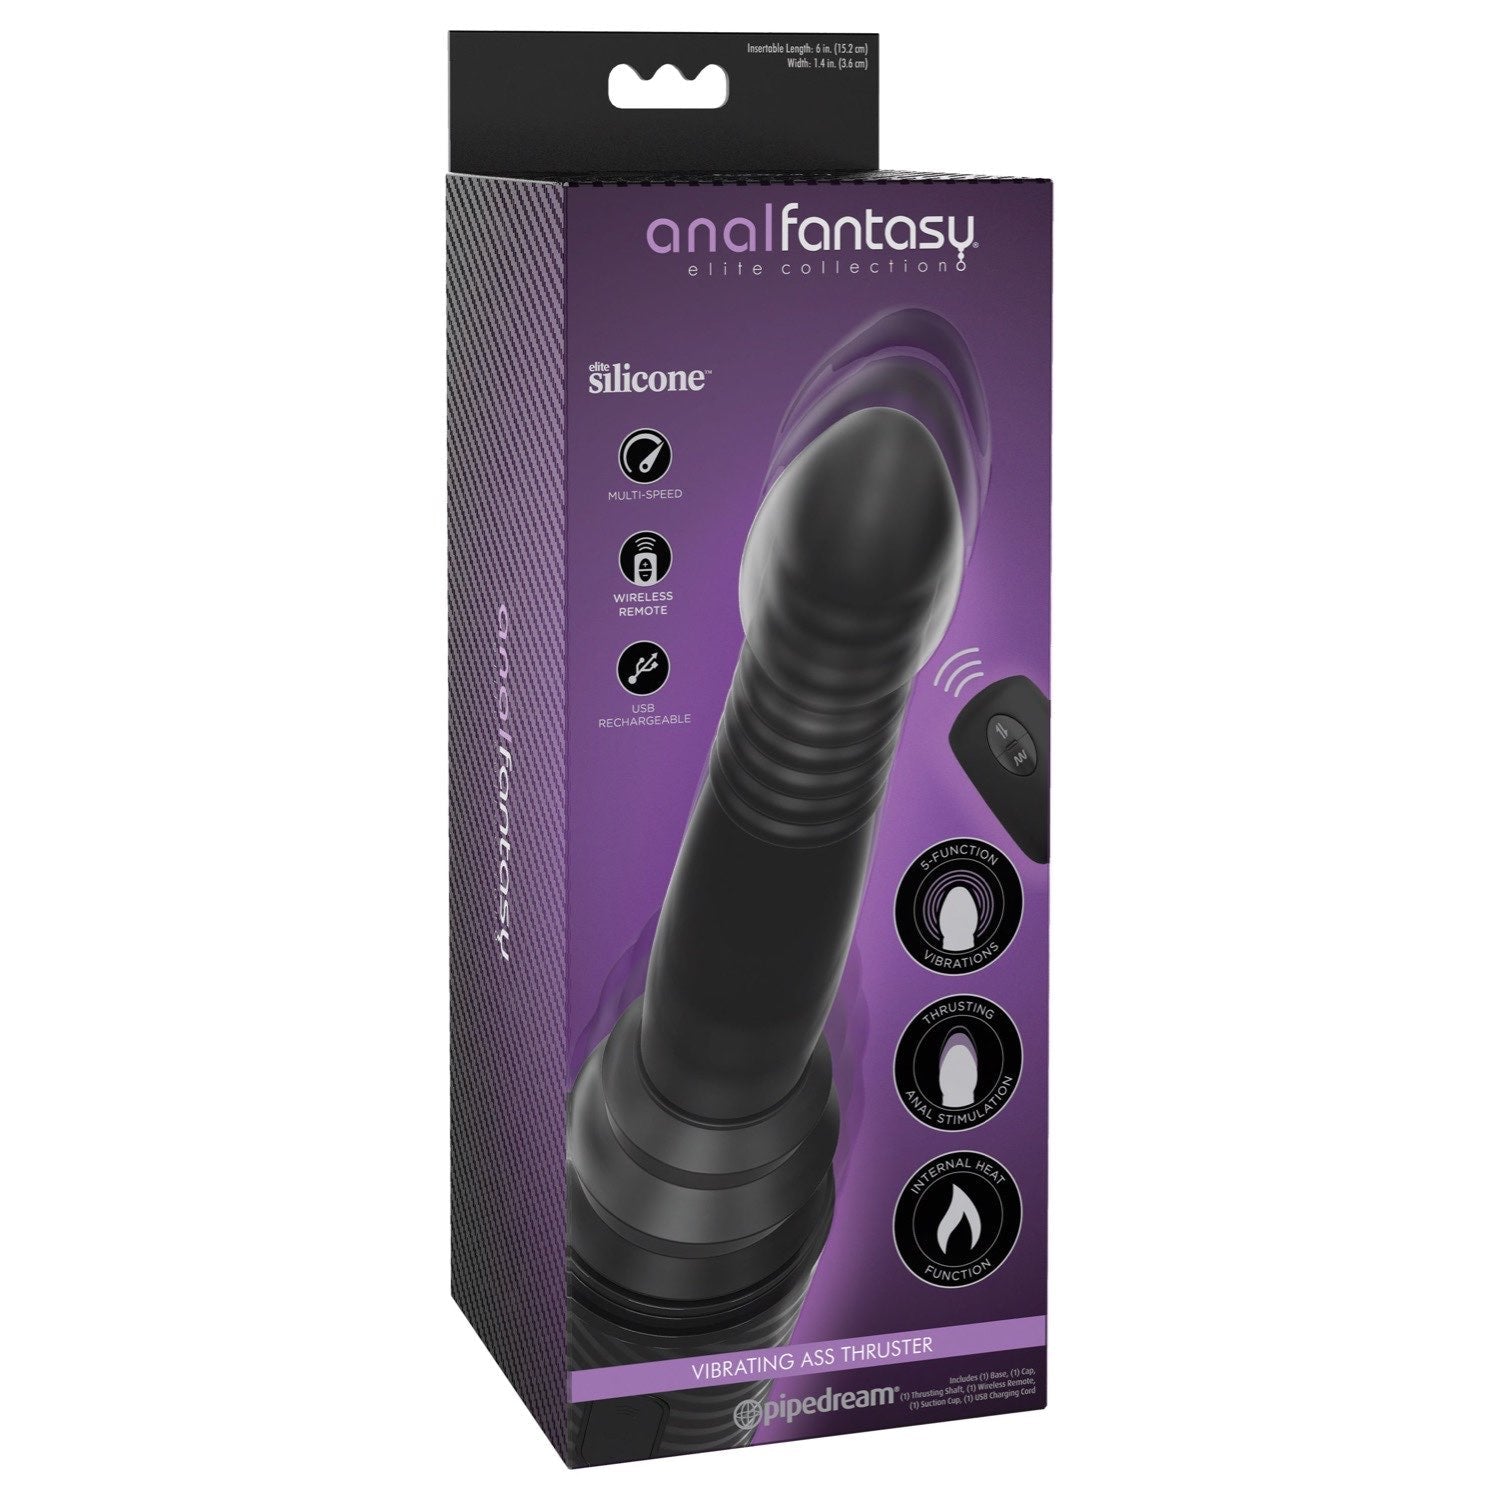 Anal Fantasy Elite Collection Vibrating Ass Thruster - Black USB Rechargeable Vibrating &amp; Thrusting Anal Vibrator by Pipedream